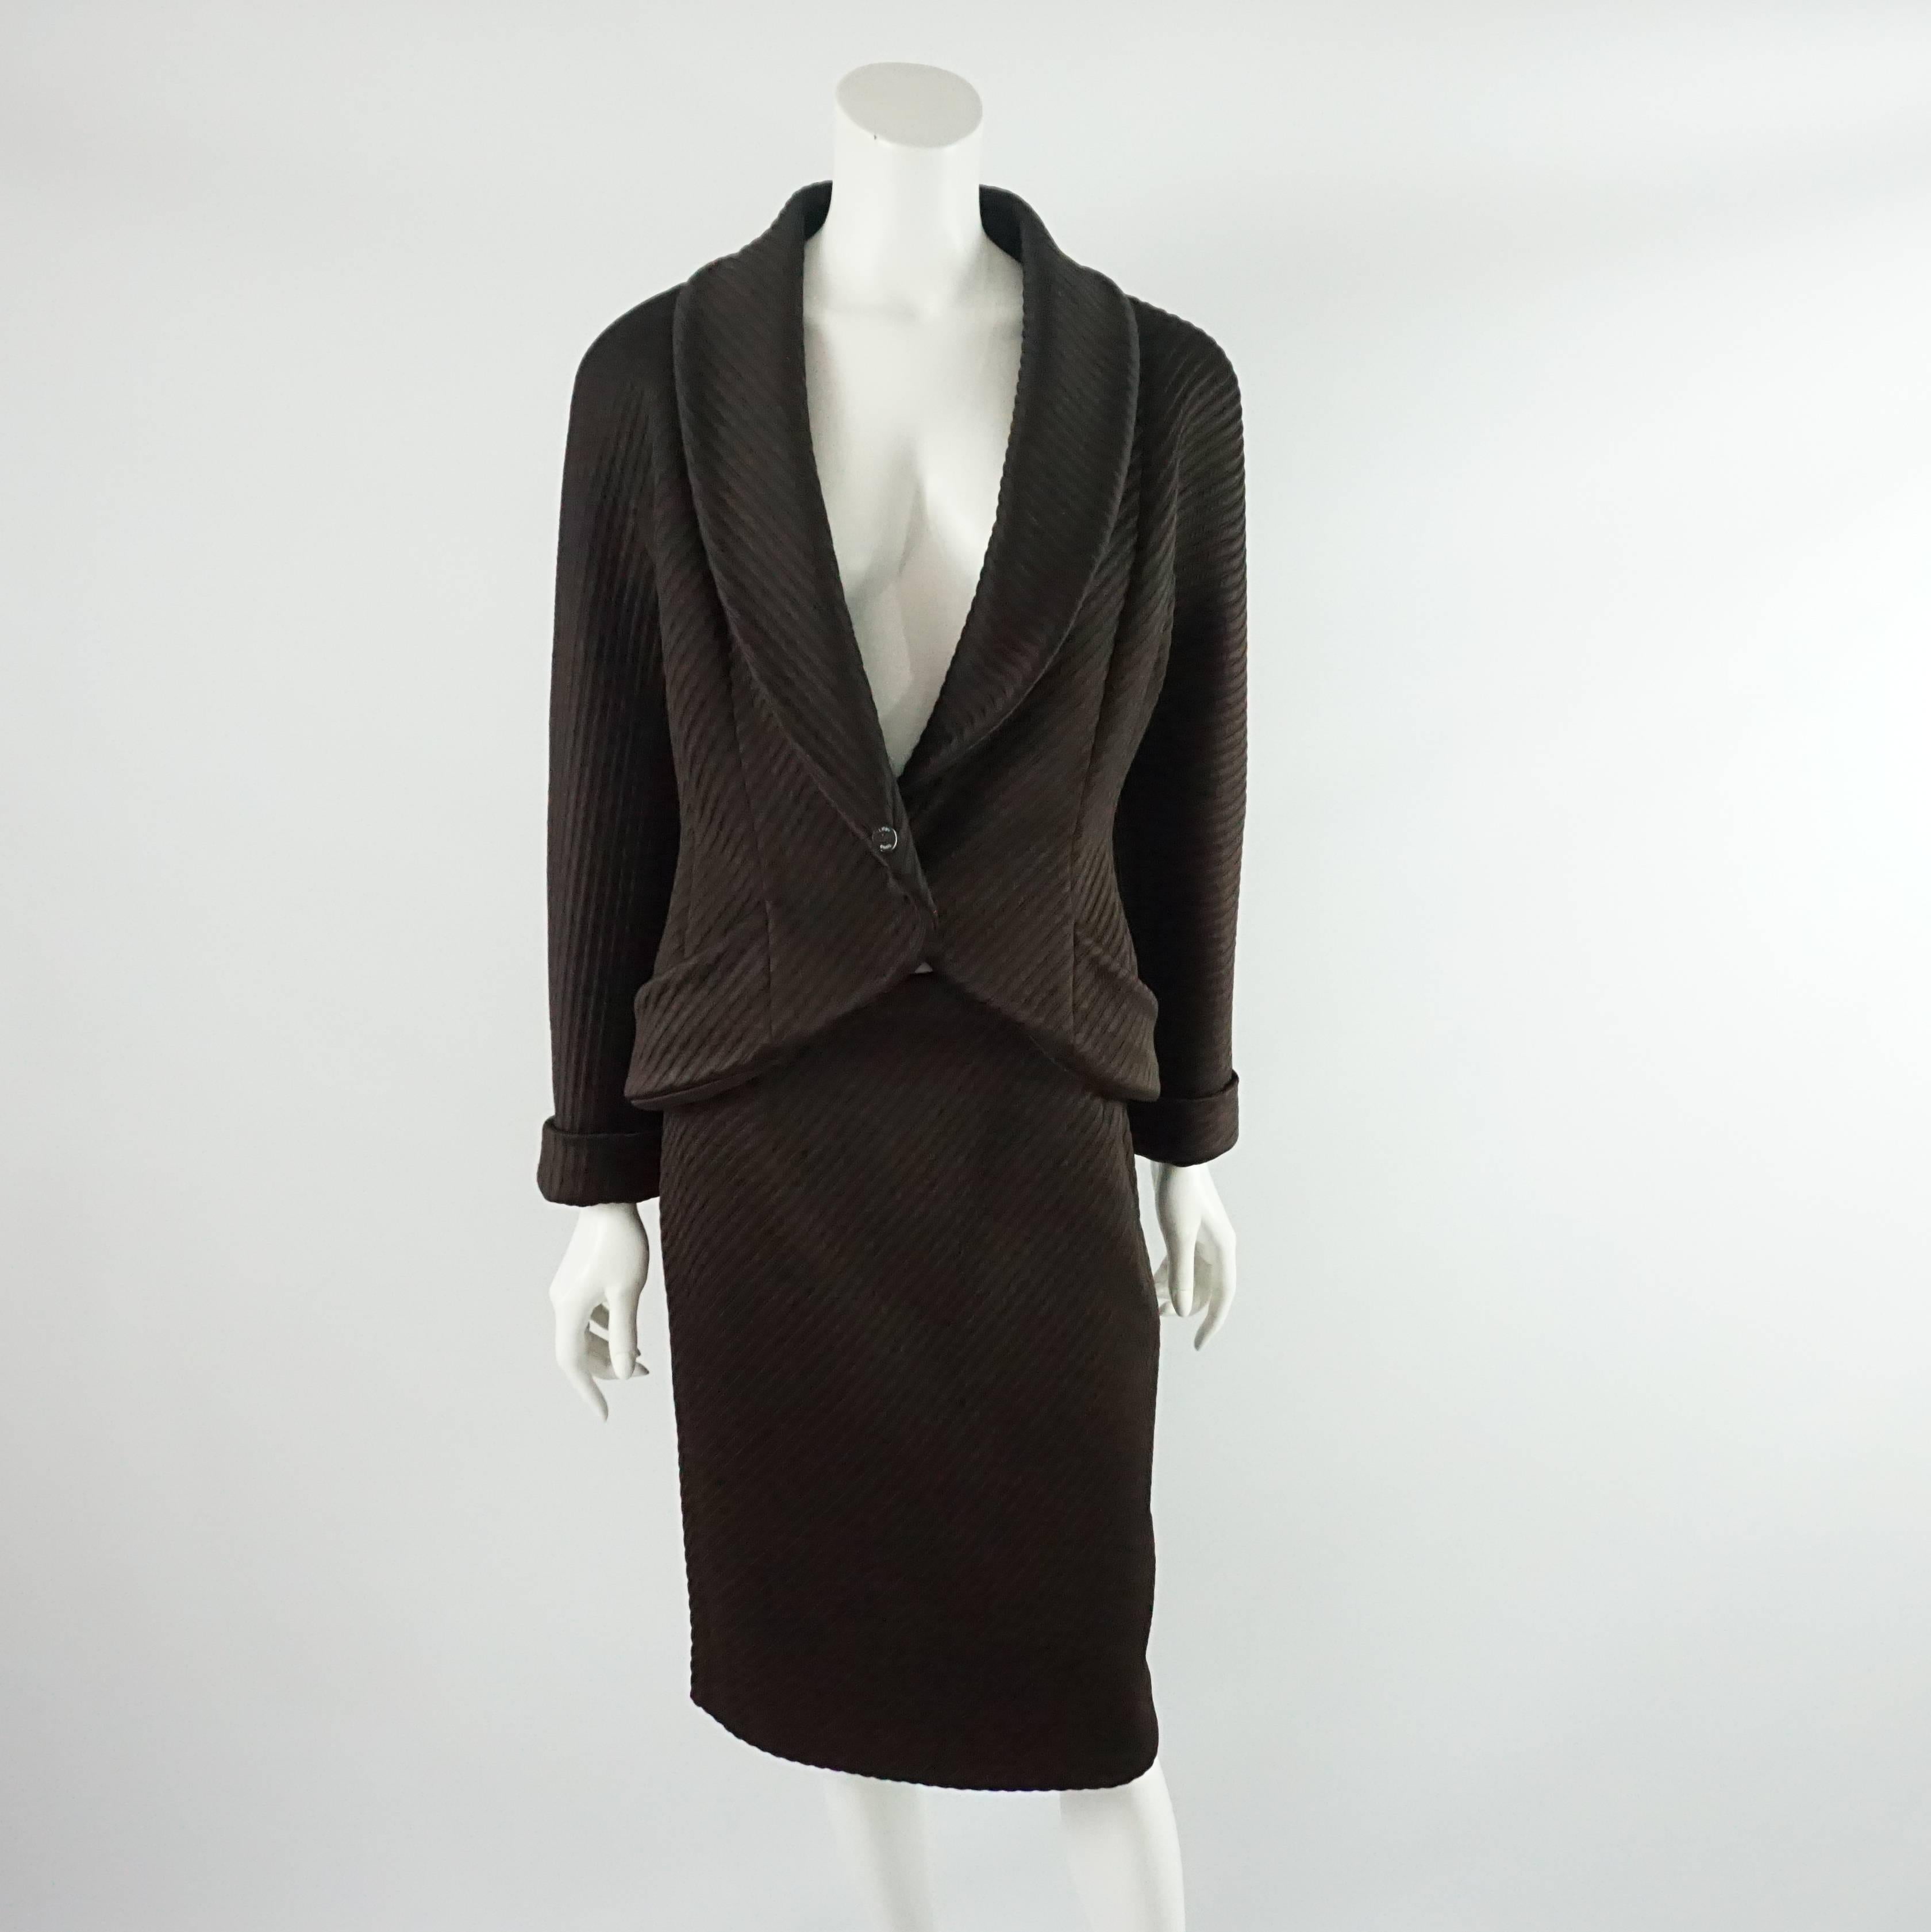 This Fendi chocolate brown skirt suit is made up of a ribbed viscose-rayon knit fabric with a removable Fisher fur collar. It has a single woven button closure with two front pockets on the jacket. The skirt has a side slit and back zipper. The